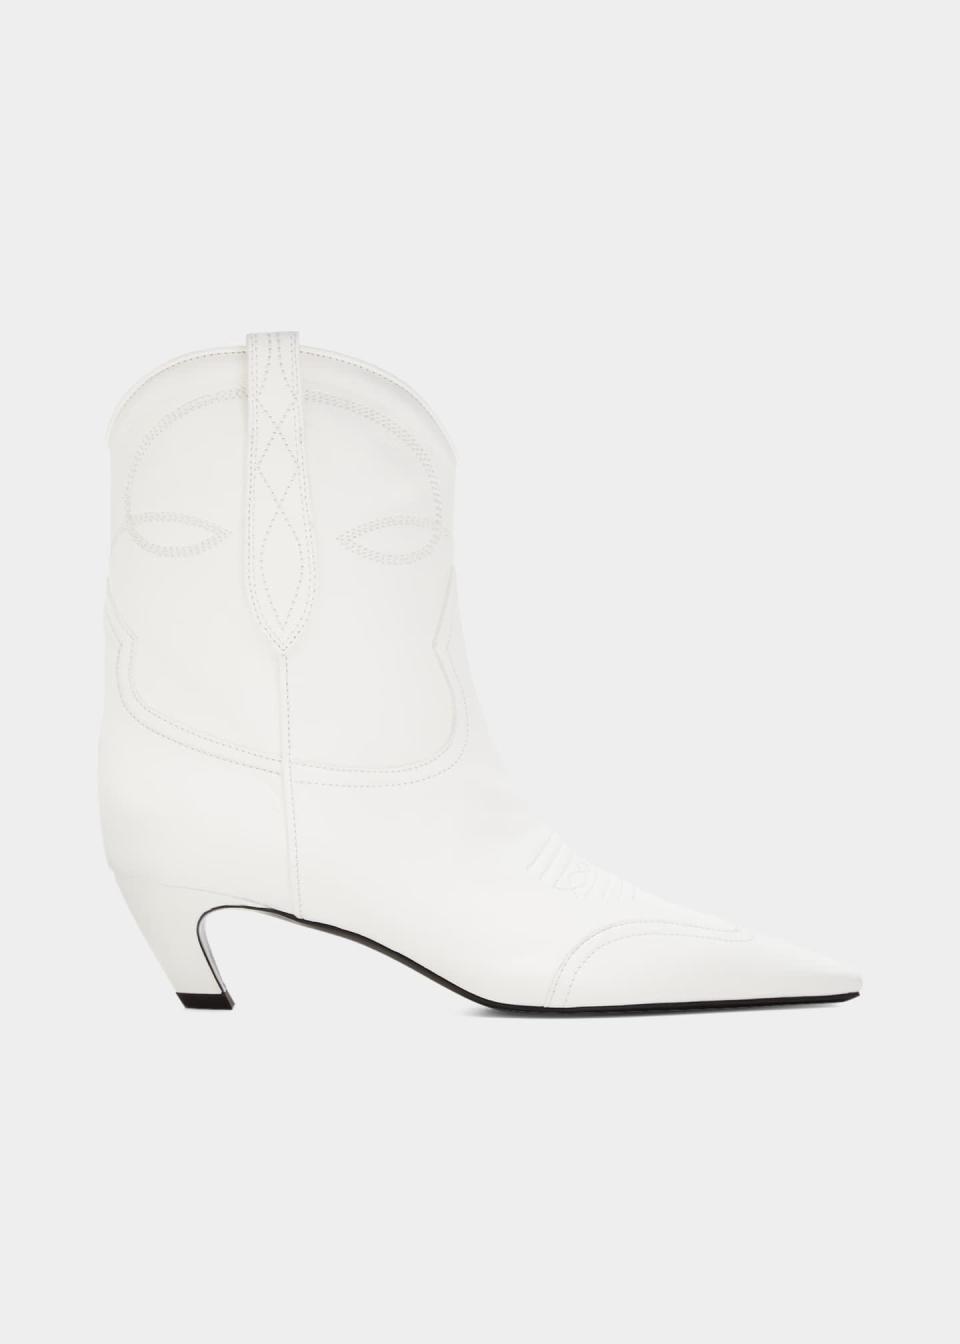 <p><strong>Khaite</strong></p><p>bergdorfgoodman.com</p><p><strong>$990.00</strong></p><p>The key to nailing the "wearing white after Labor Day look" lies in these sleek calfskin leather ankle boots that provide a smidge of height with curved kitten heels. </p>